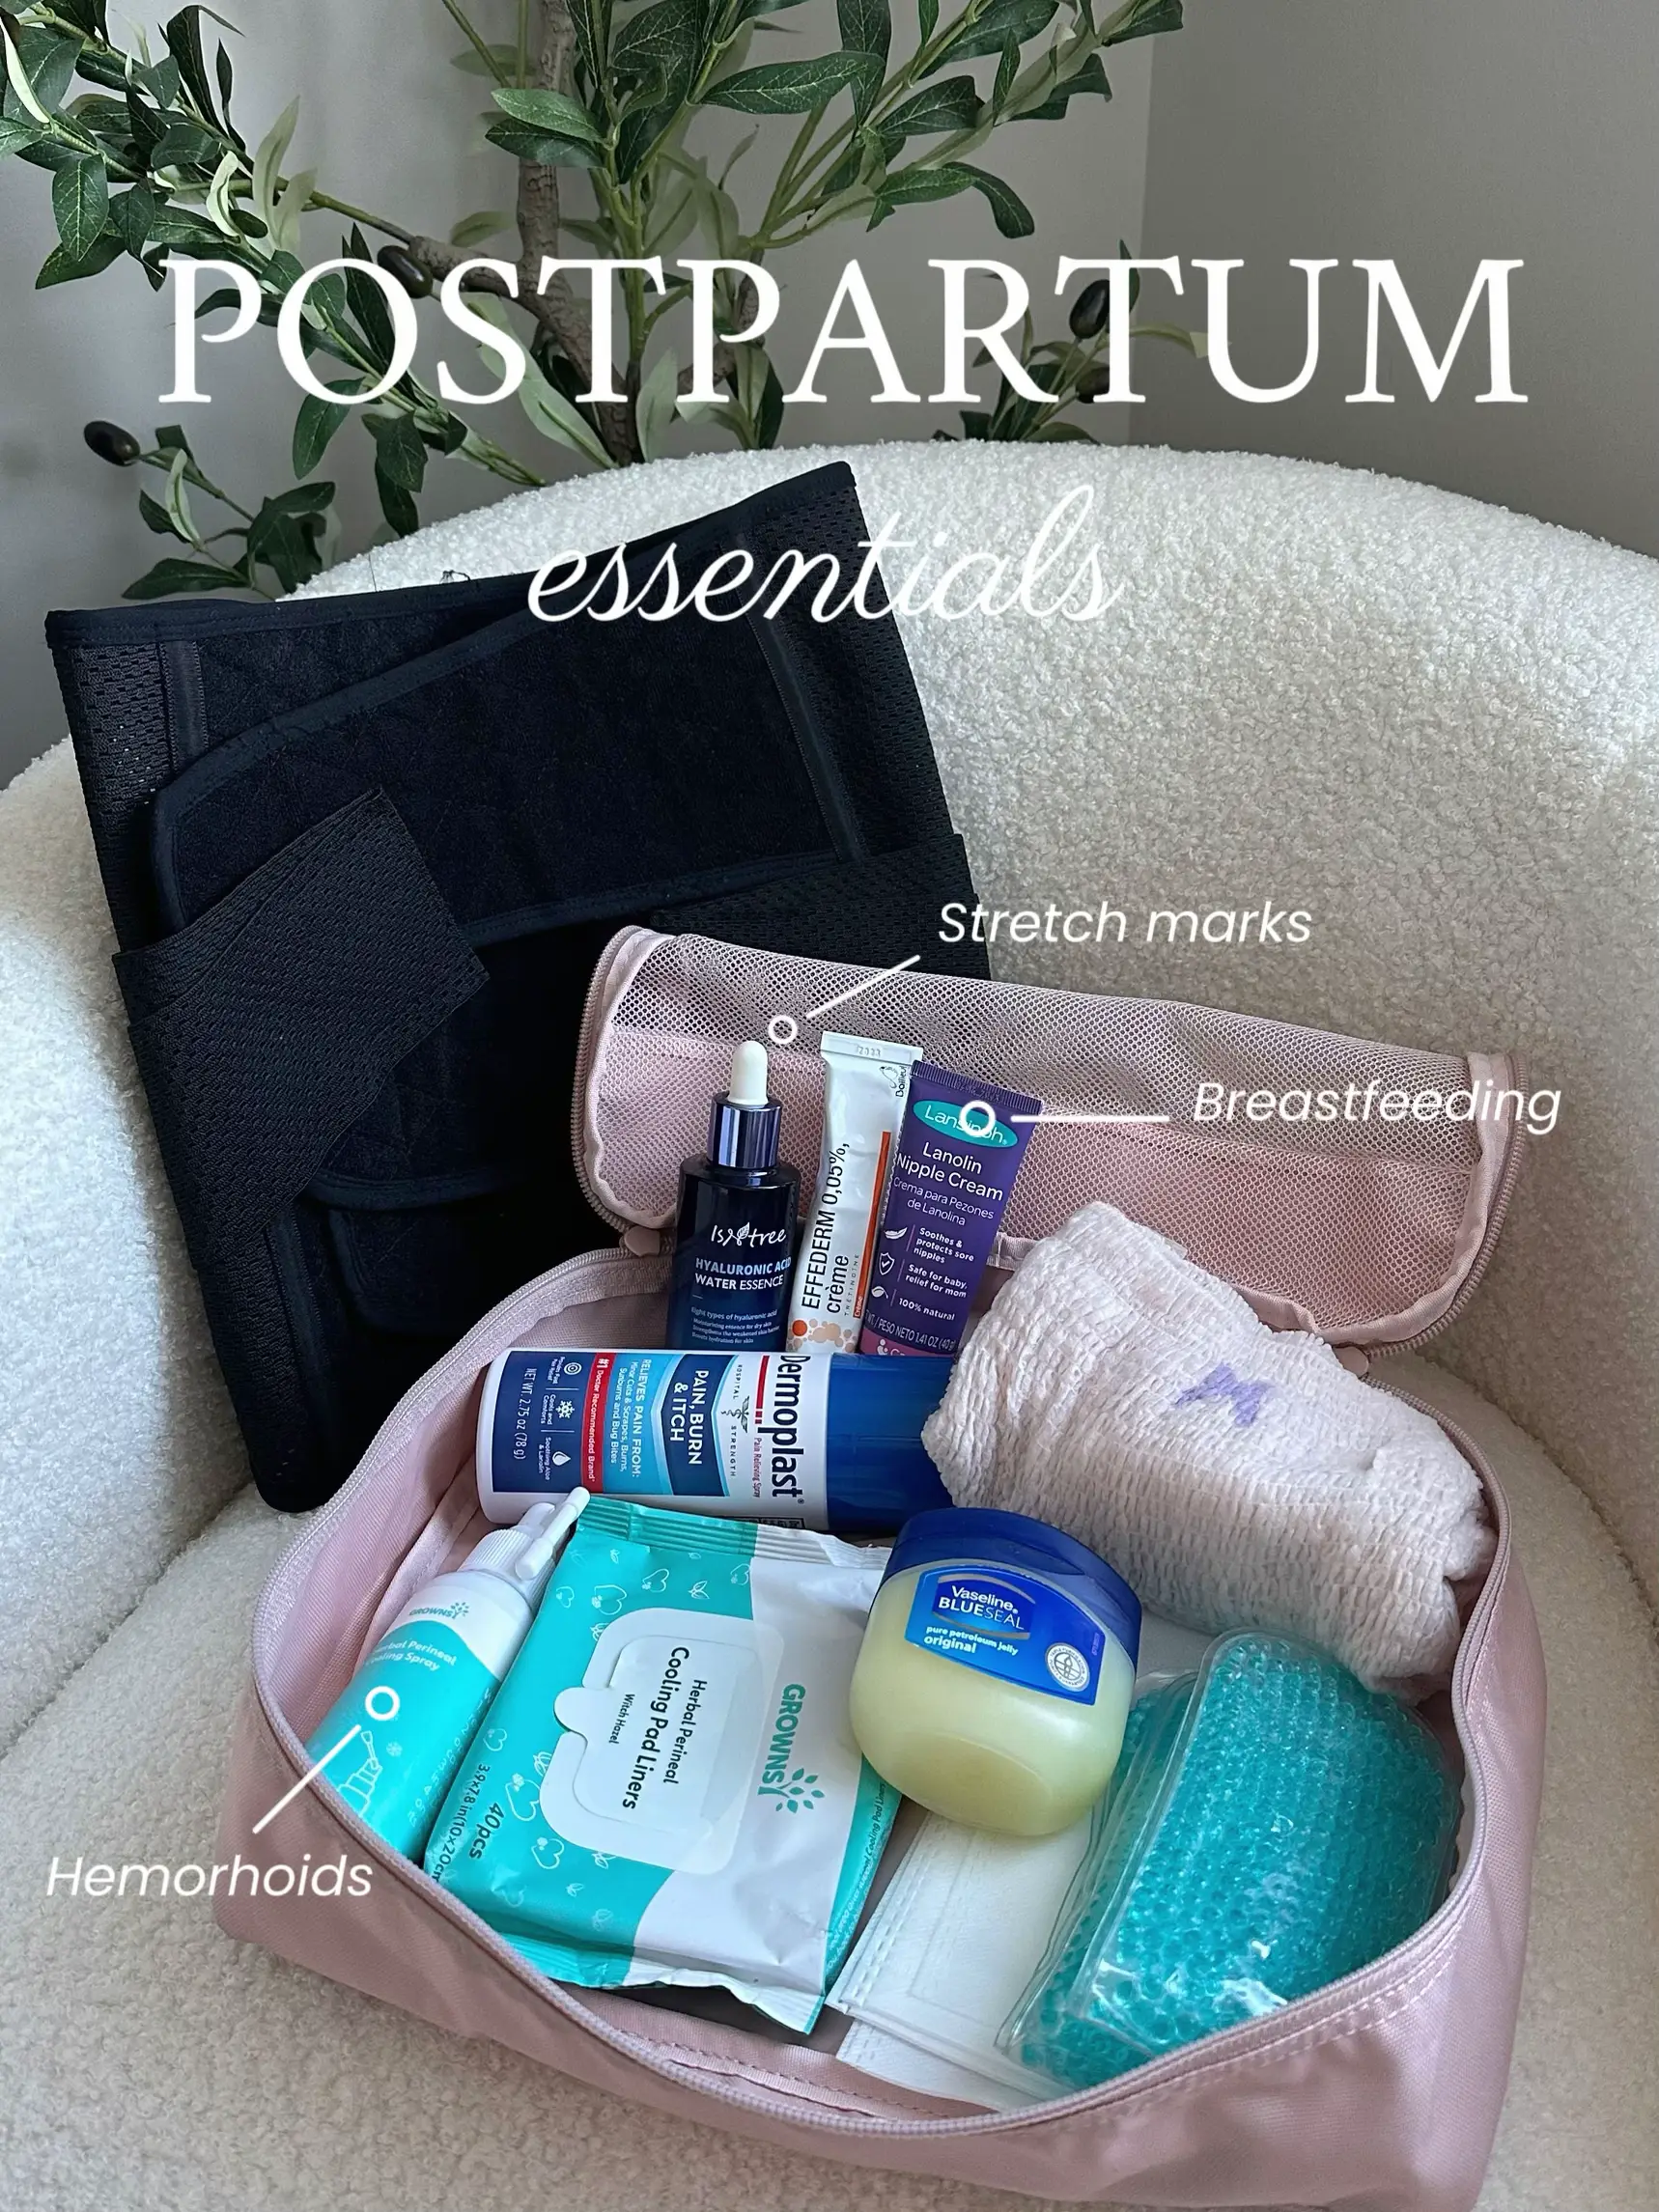 Going home”/ postpartum outfits, Gallery posted by grace, sahm